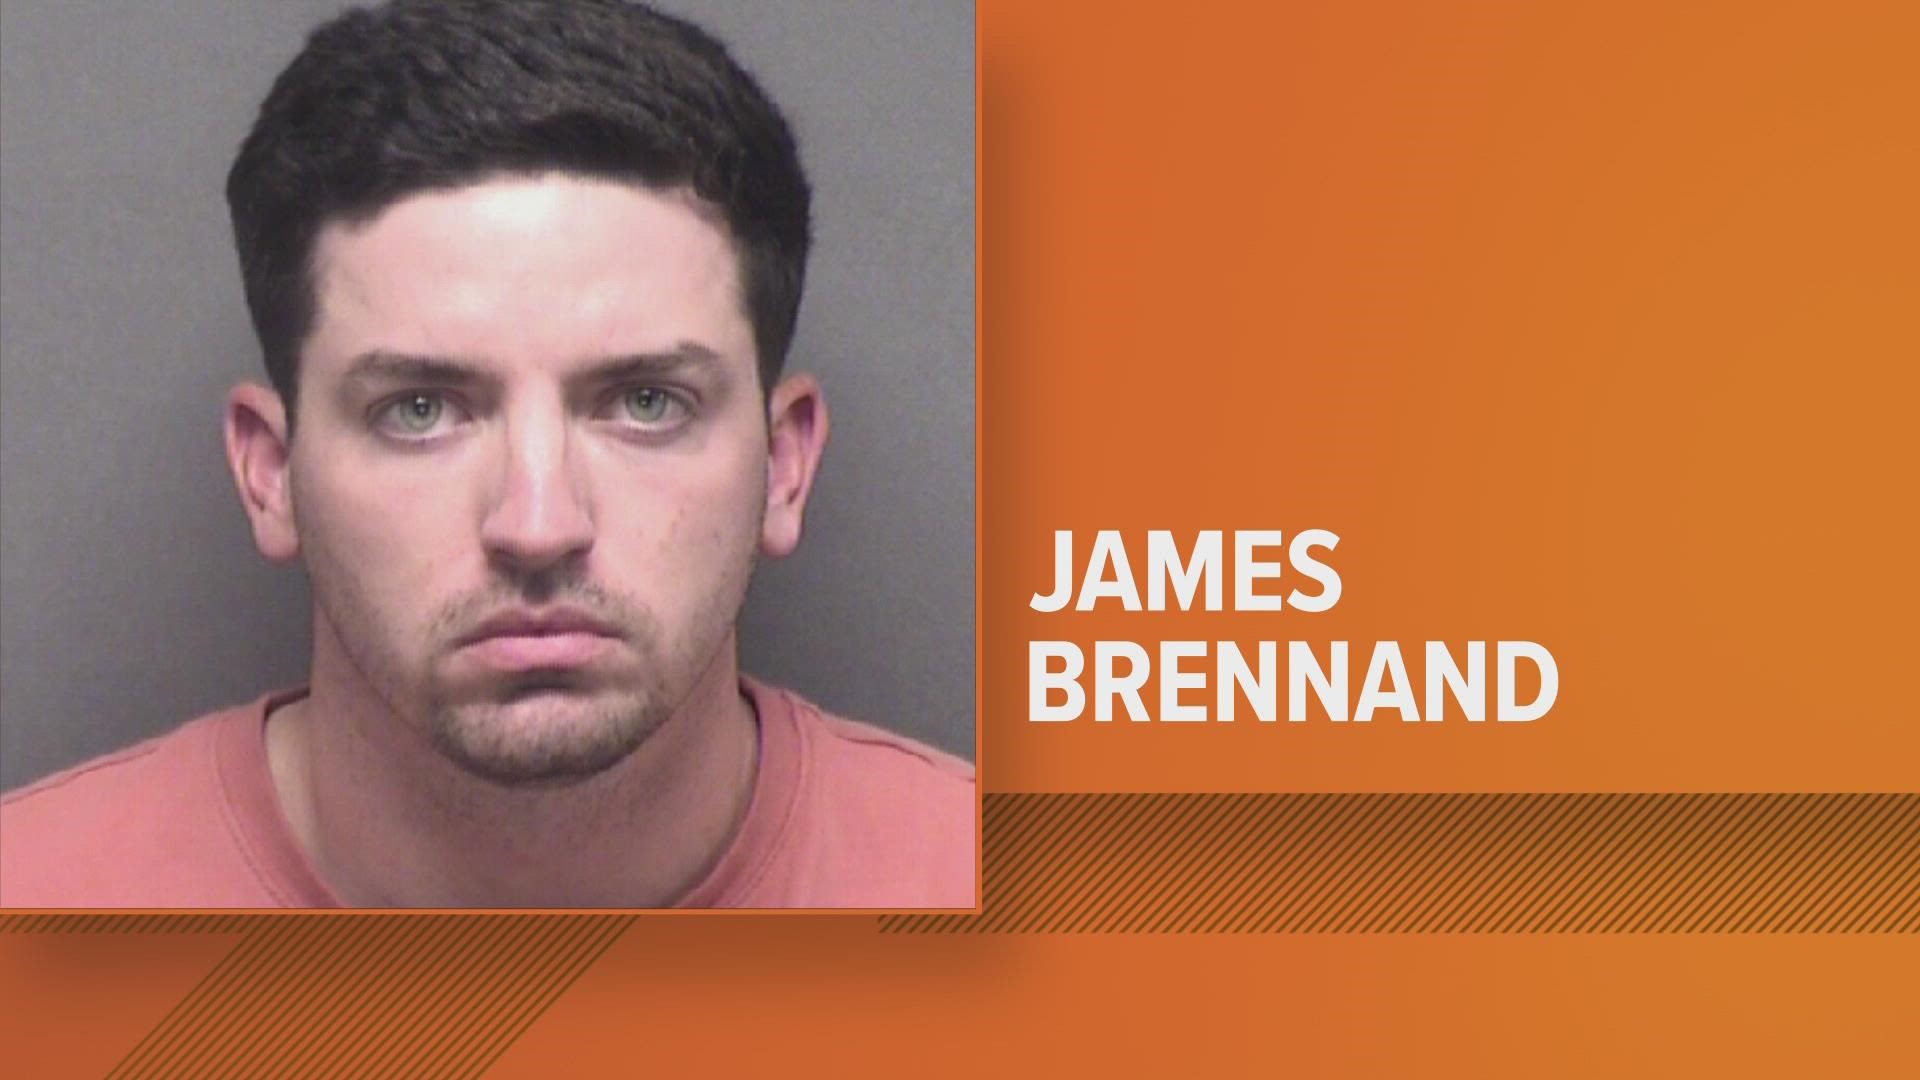 James Brennand was fired just over a week ago after shooting a teen at point-blank range while he was sitting in his car.